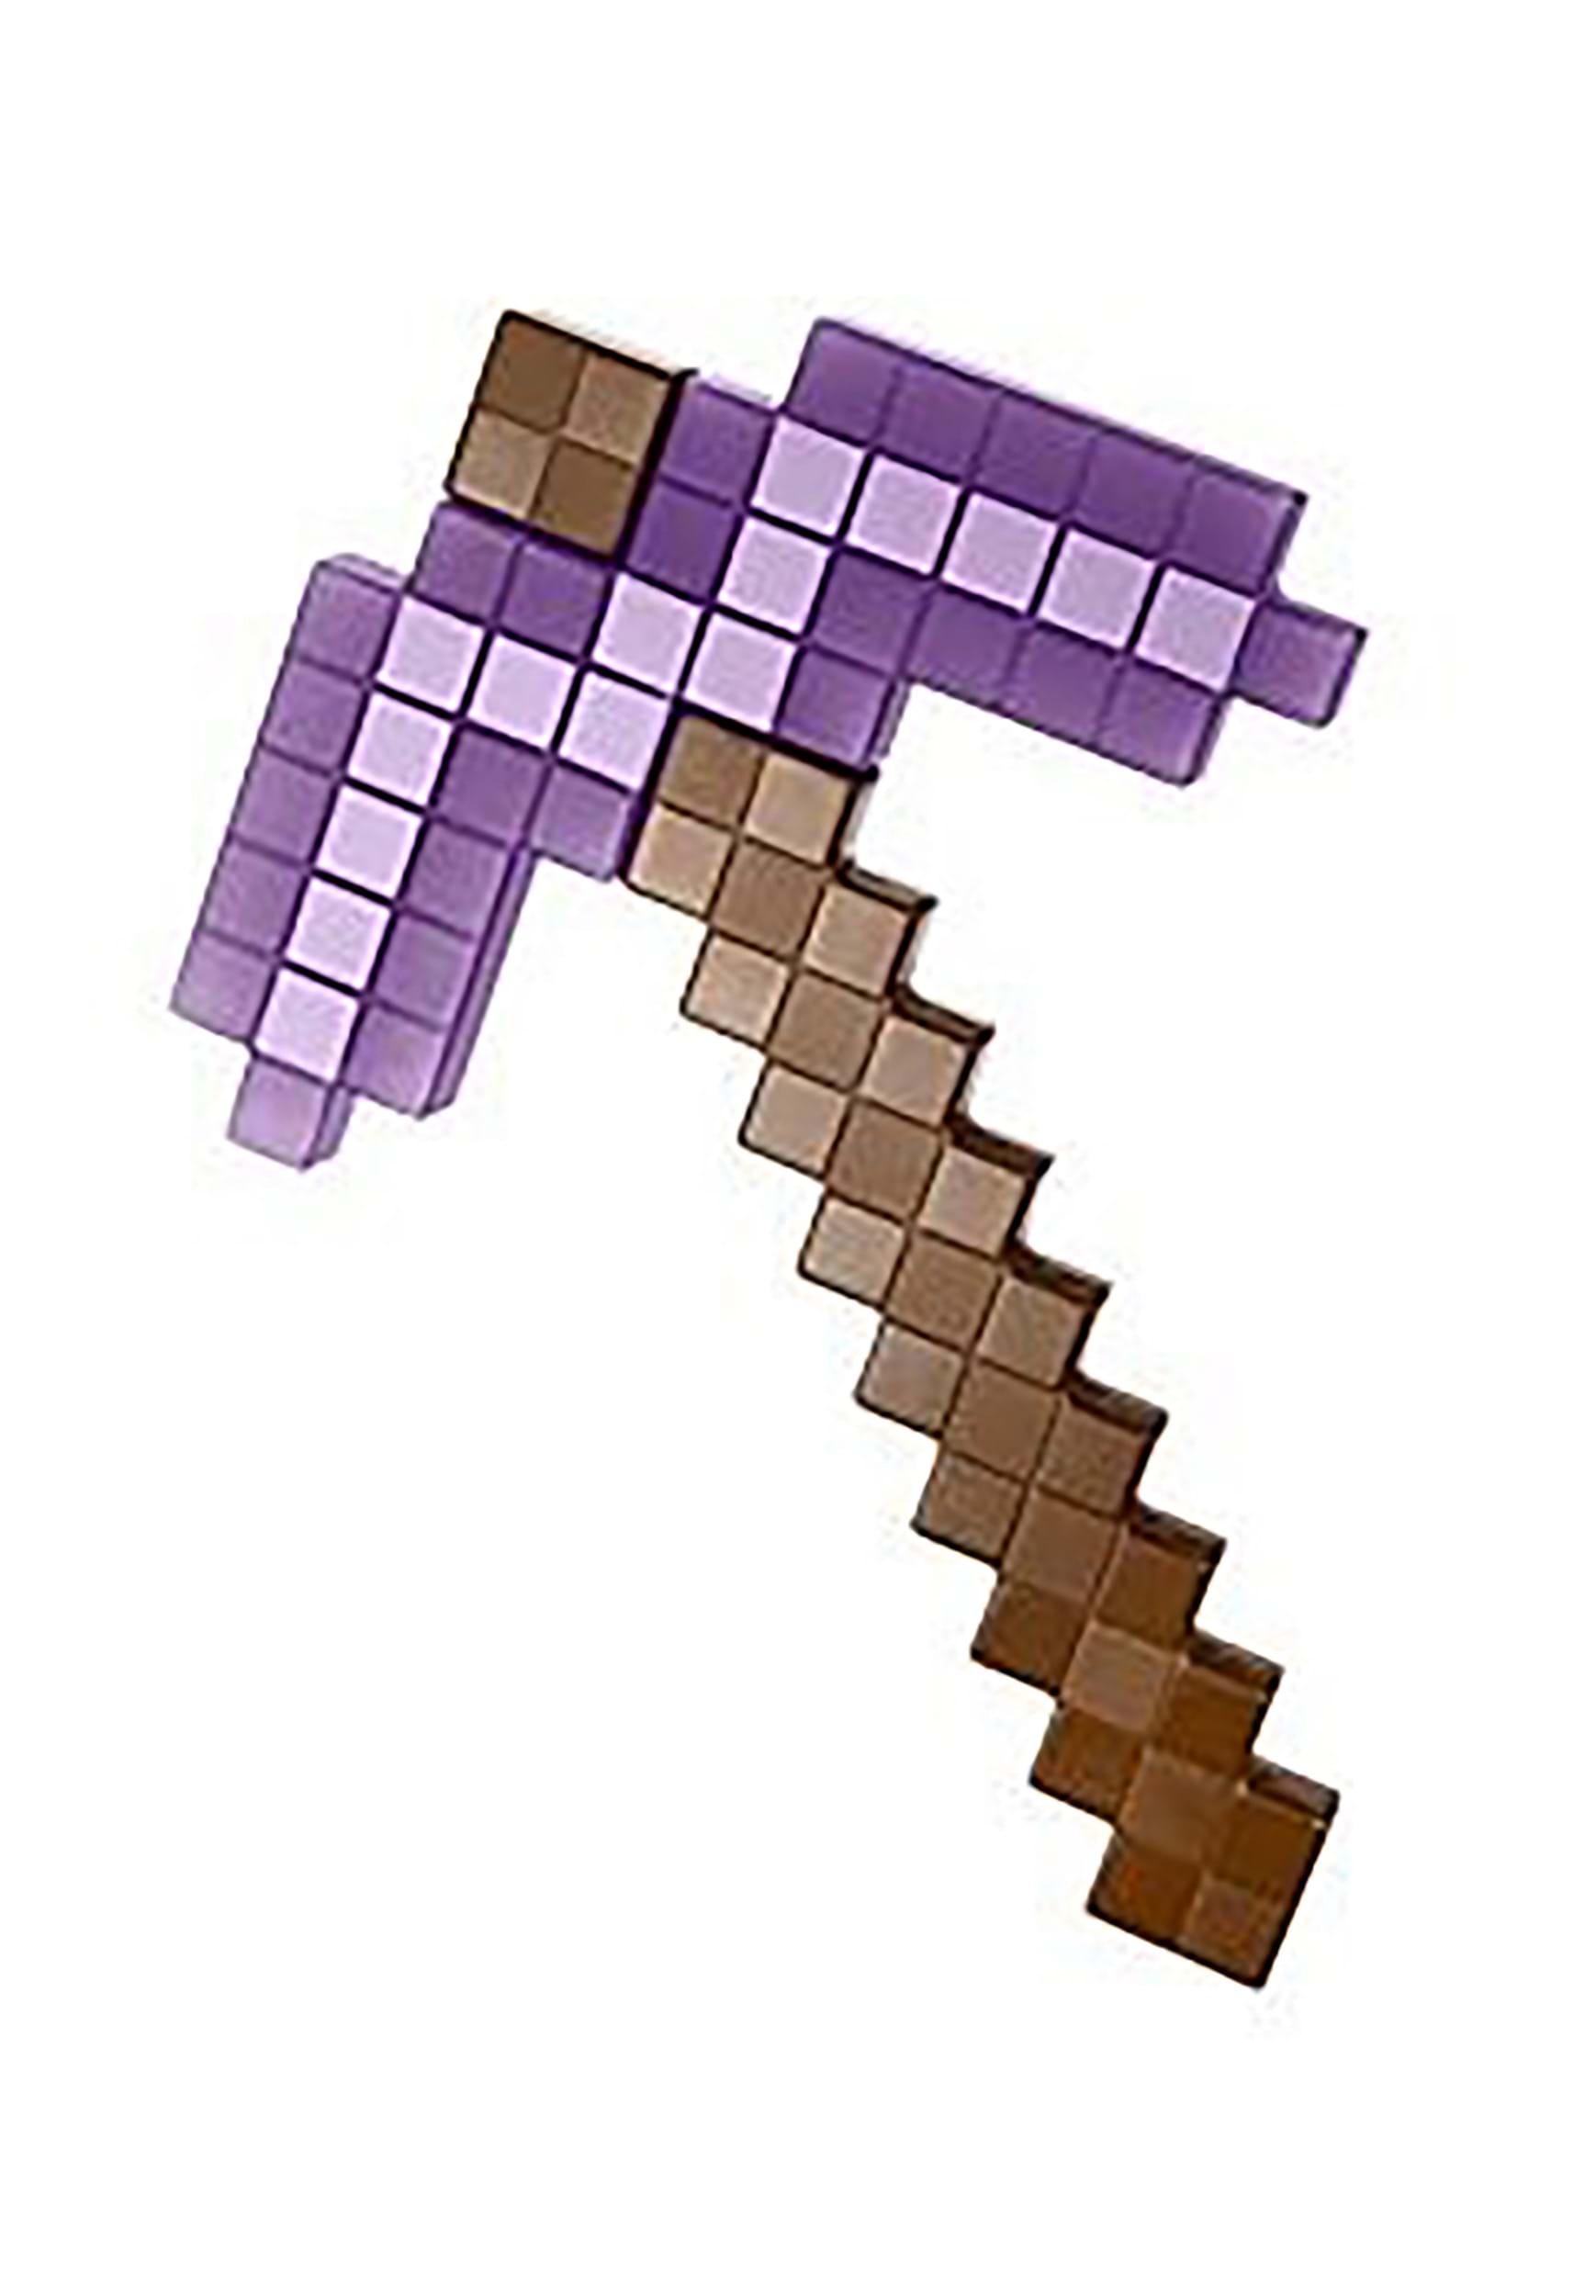 https://images.halloweencostumes.ca/products/86690/1-1/minecraft-enchanted-pickaxe.jpg